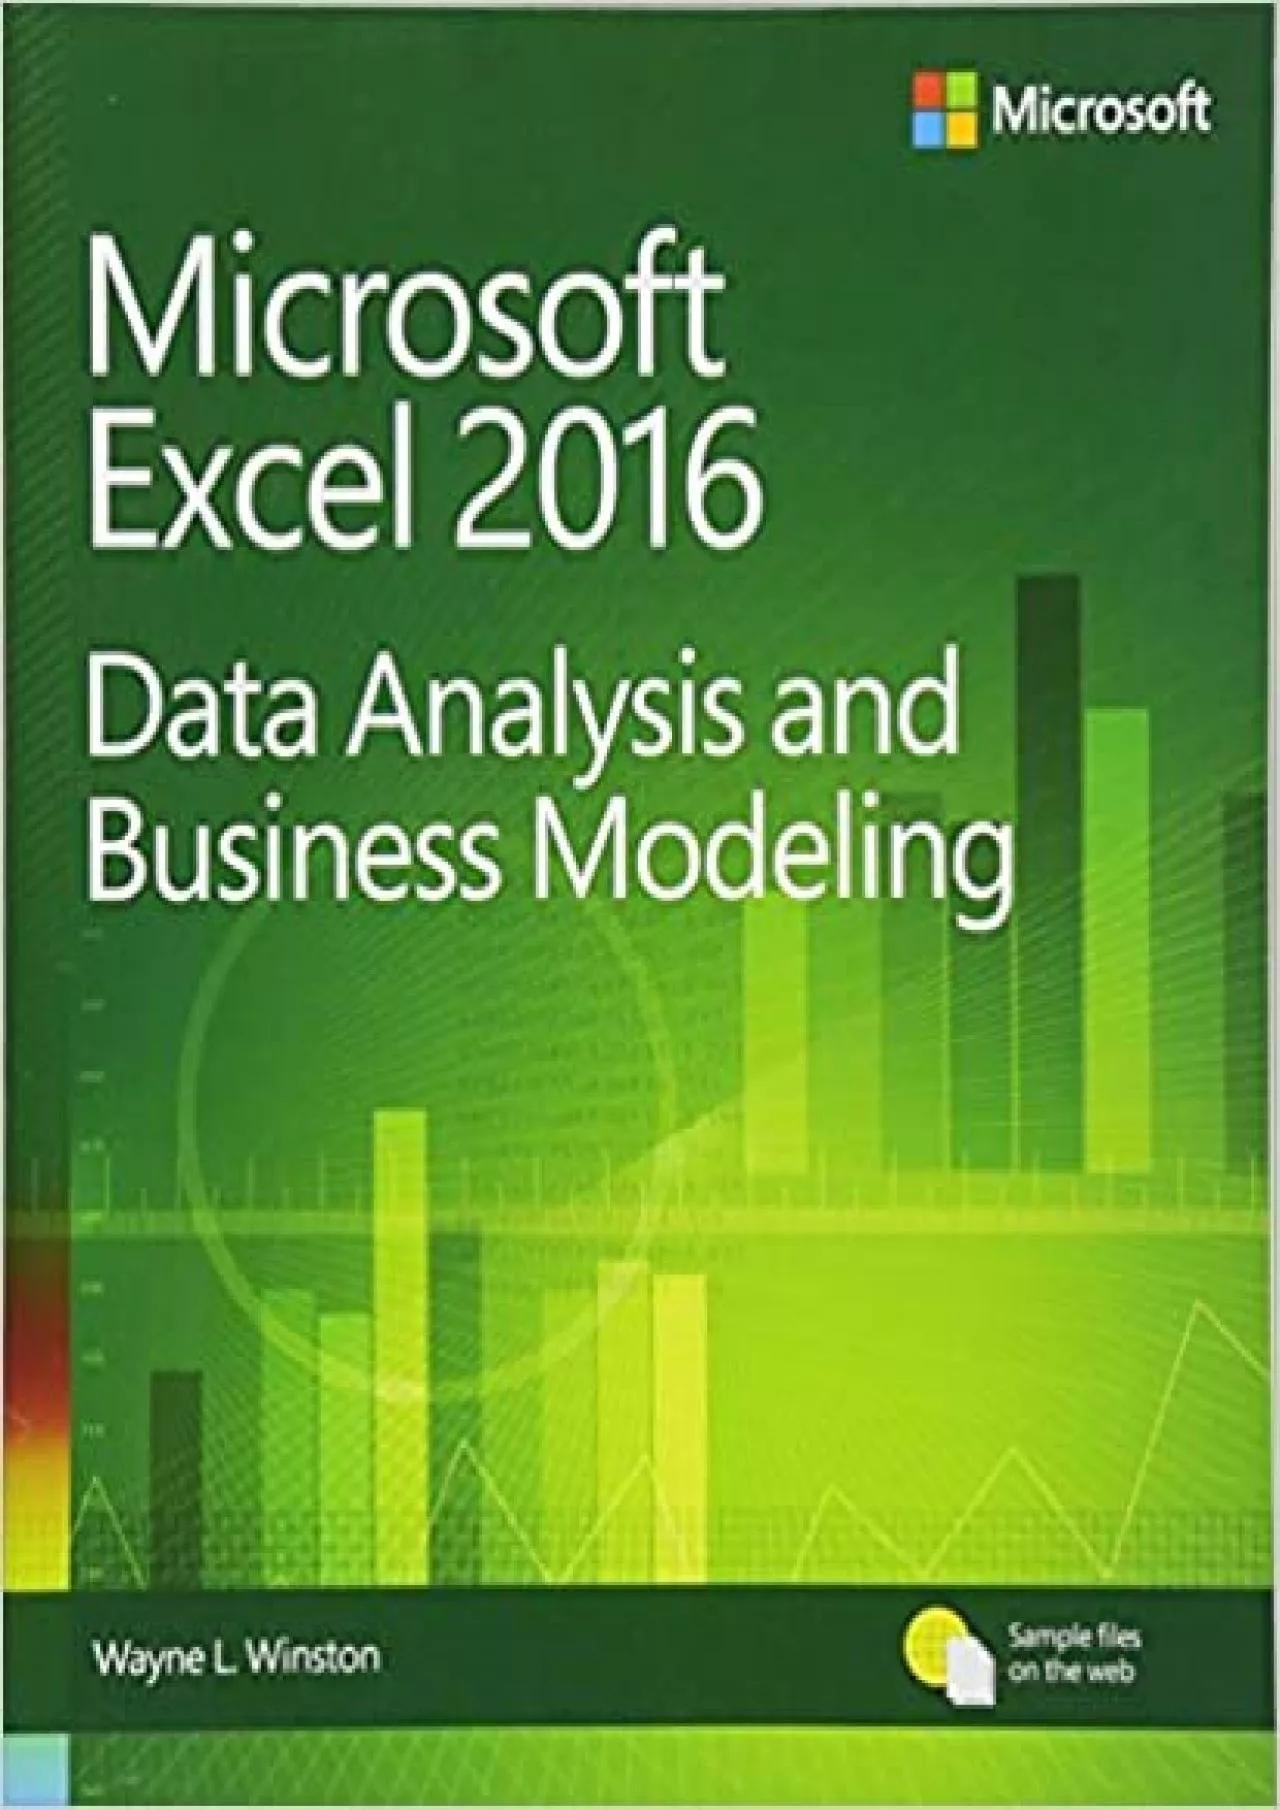 Microsoft Excel Data Analysis and Business Modeling (Business Skills)